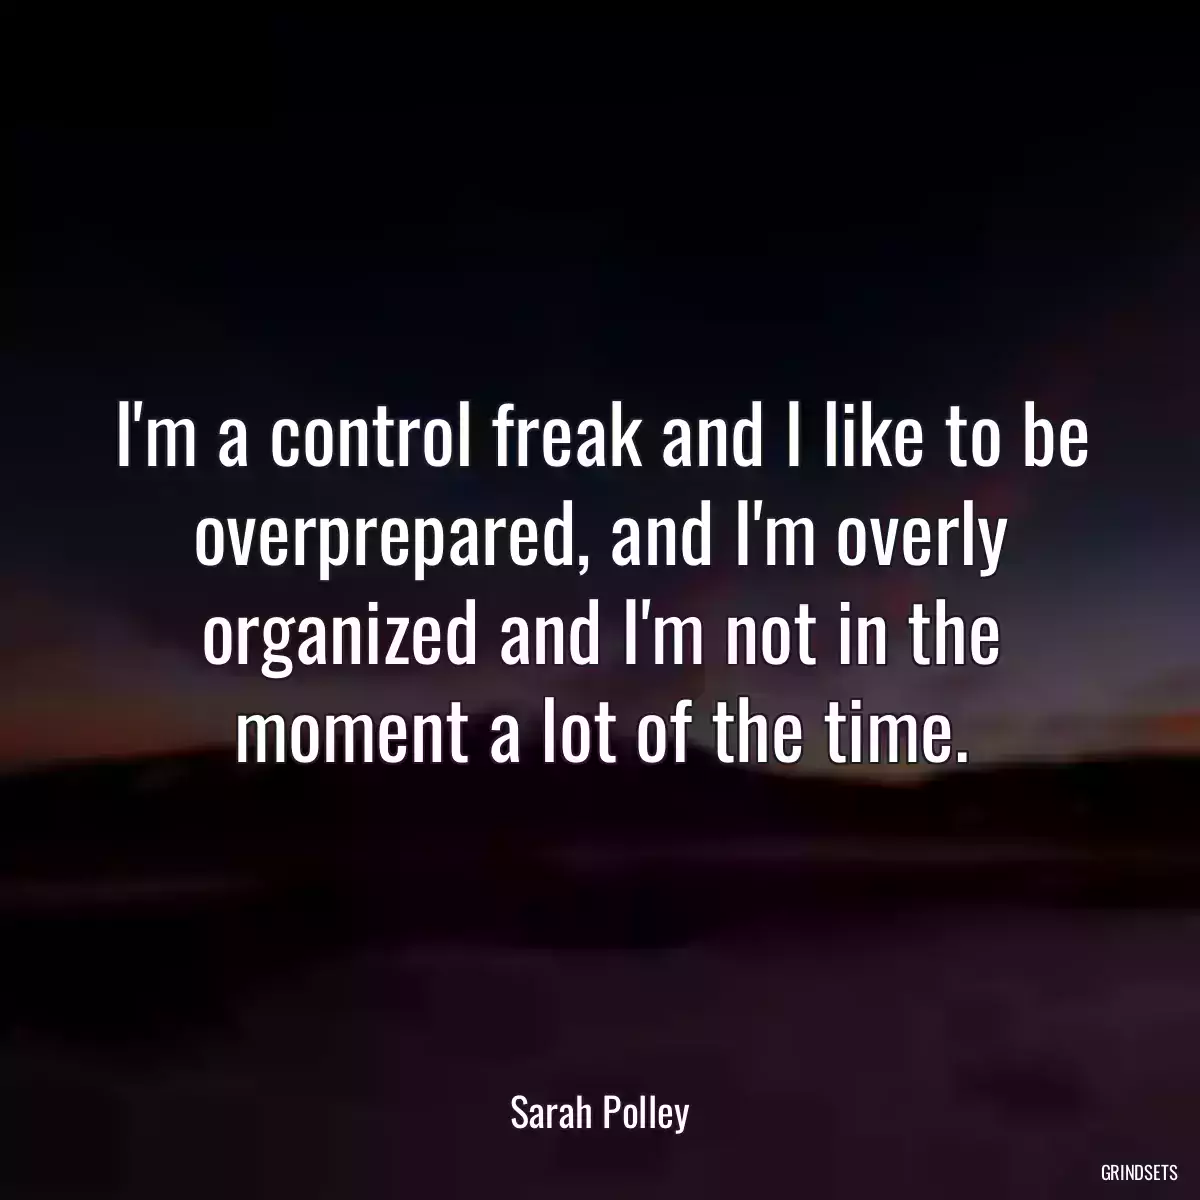 I\'m a control freak and I like to be overprepared, and I\'m overly organized and I\'m not in the moment a lot of the time.